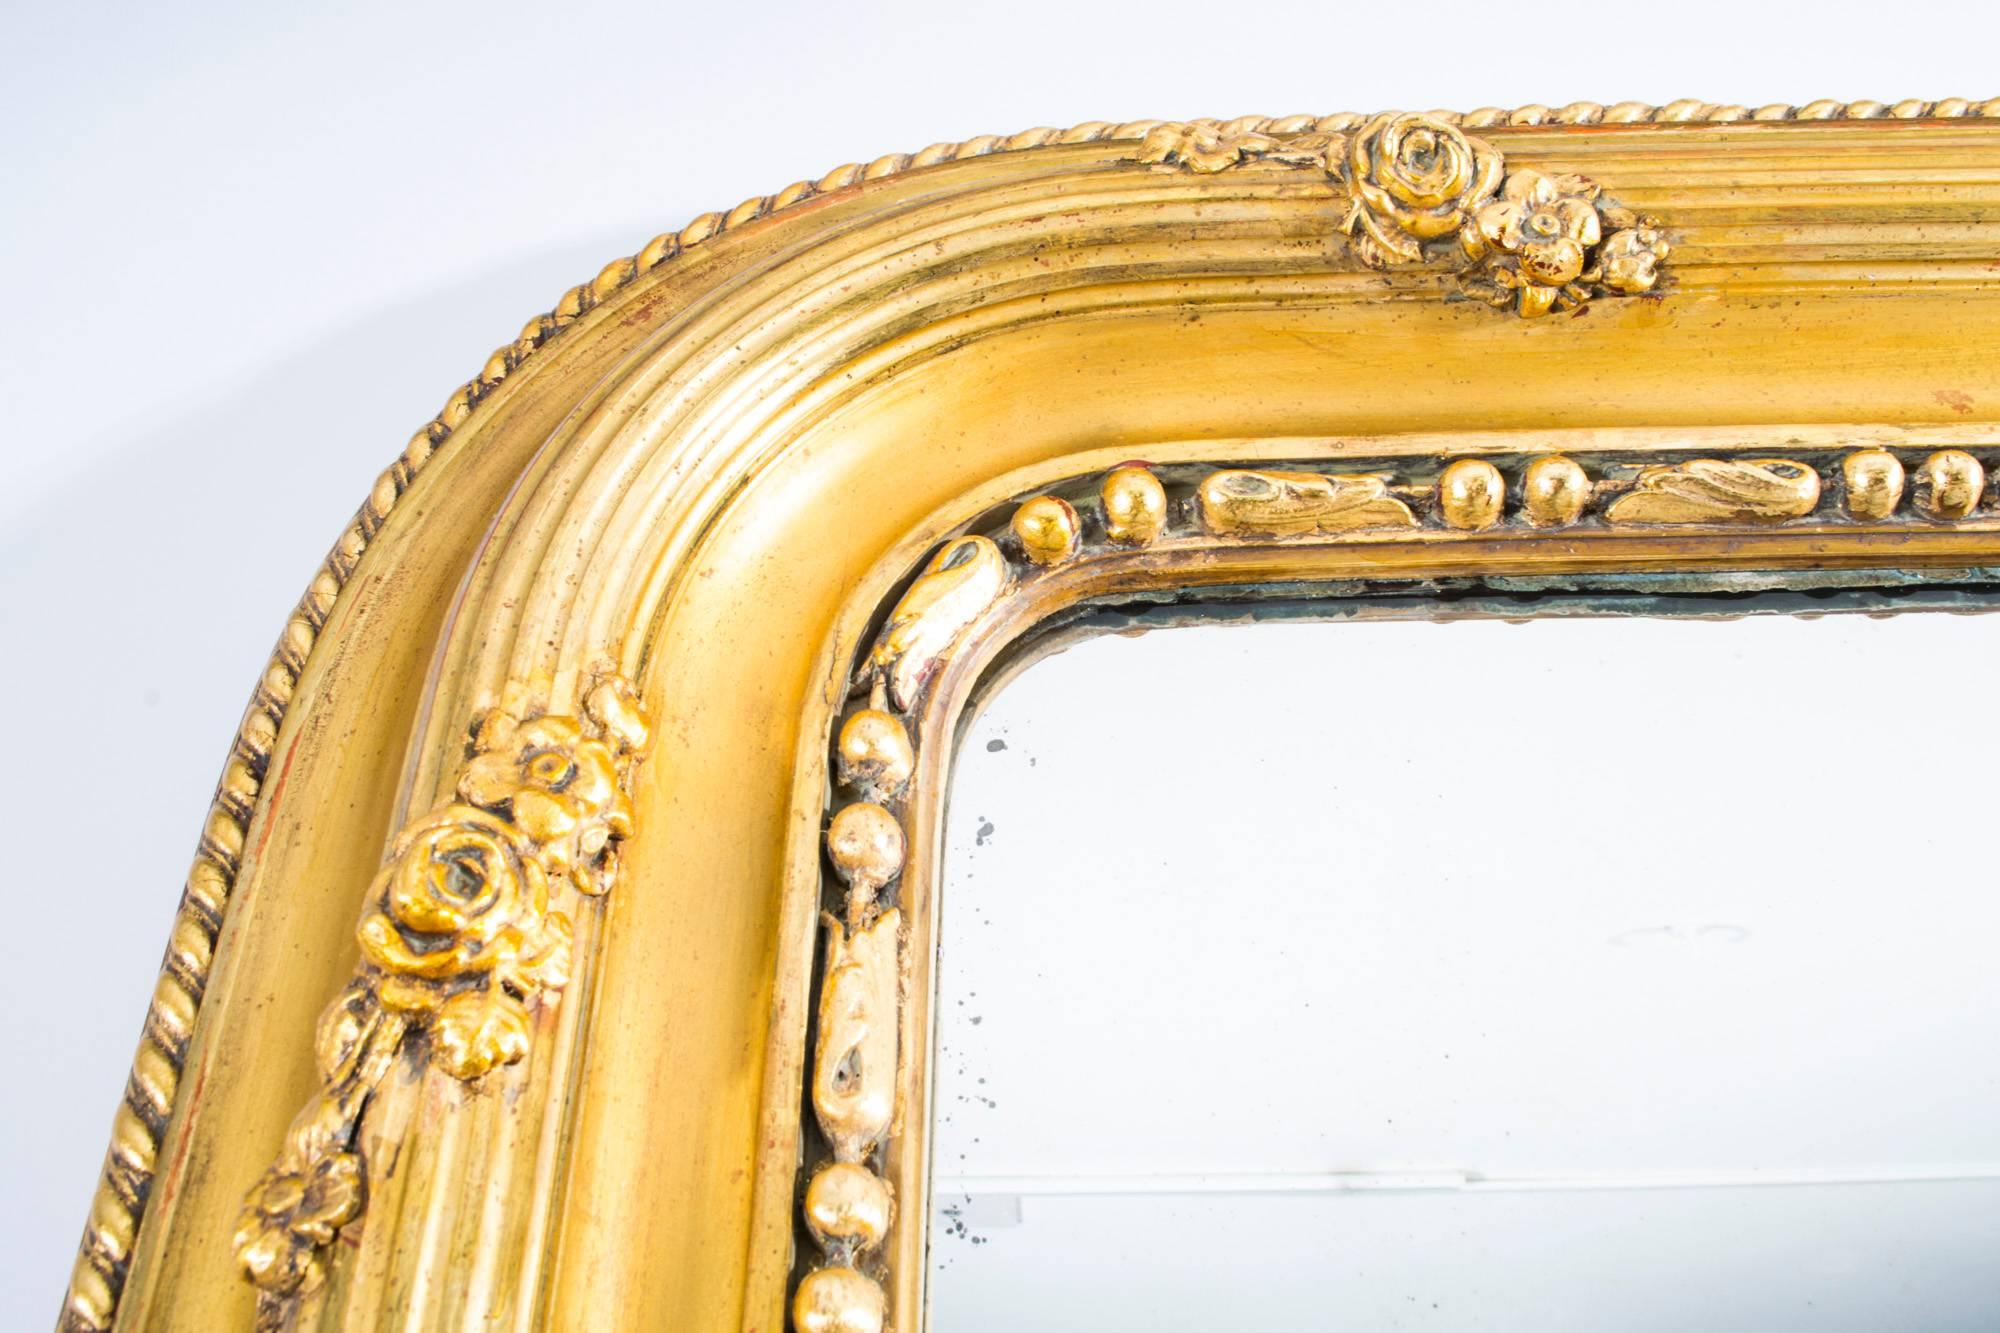 An large and impressive French carved giltwood and gesso overmantel mirror, circa 1860 in date.
The rectangular mirror has its original glass plate. It features a superbly carved giltwood and gesso frame which is decorated with a central fluted